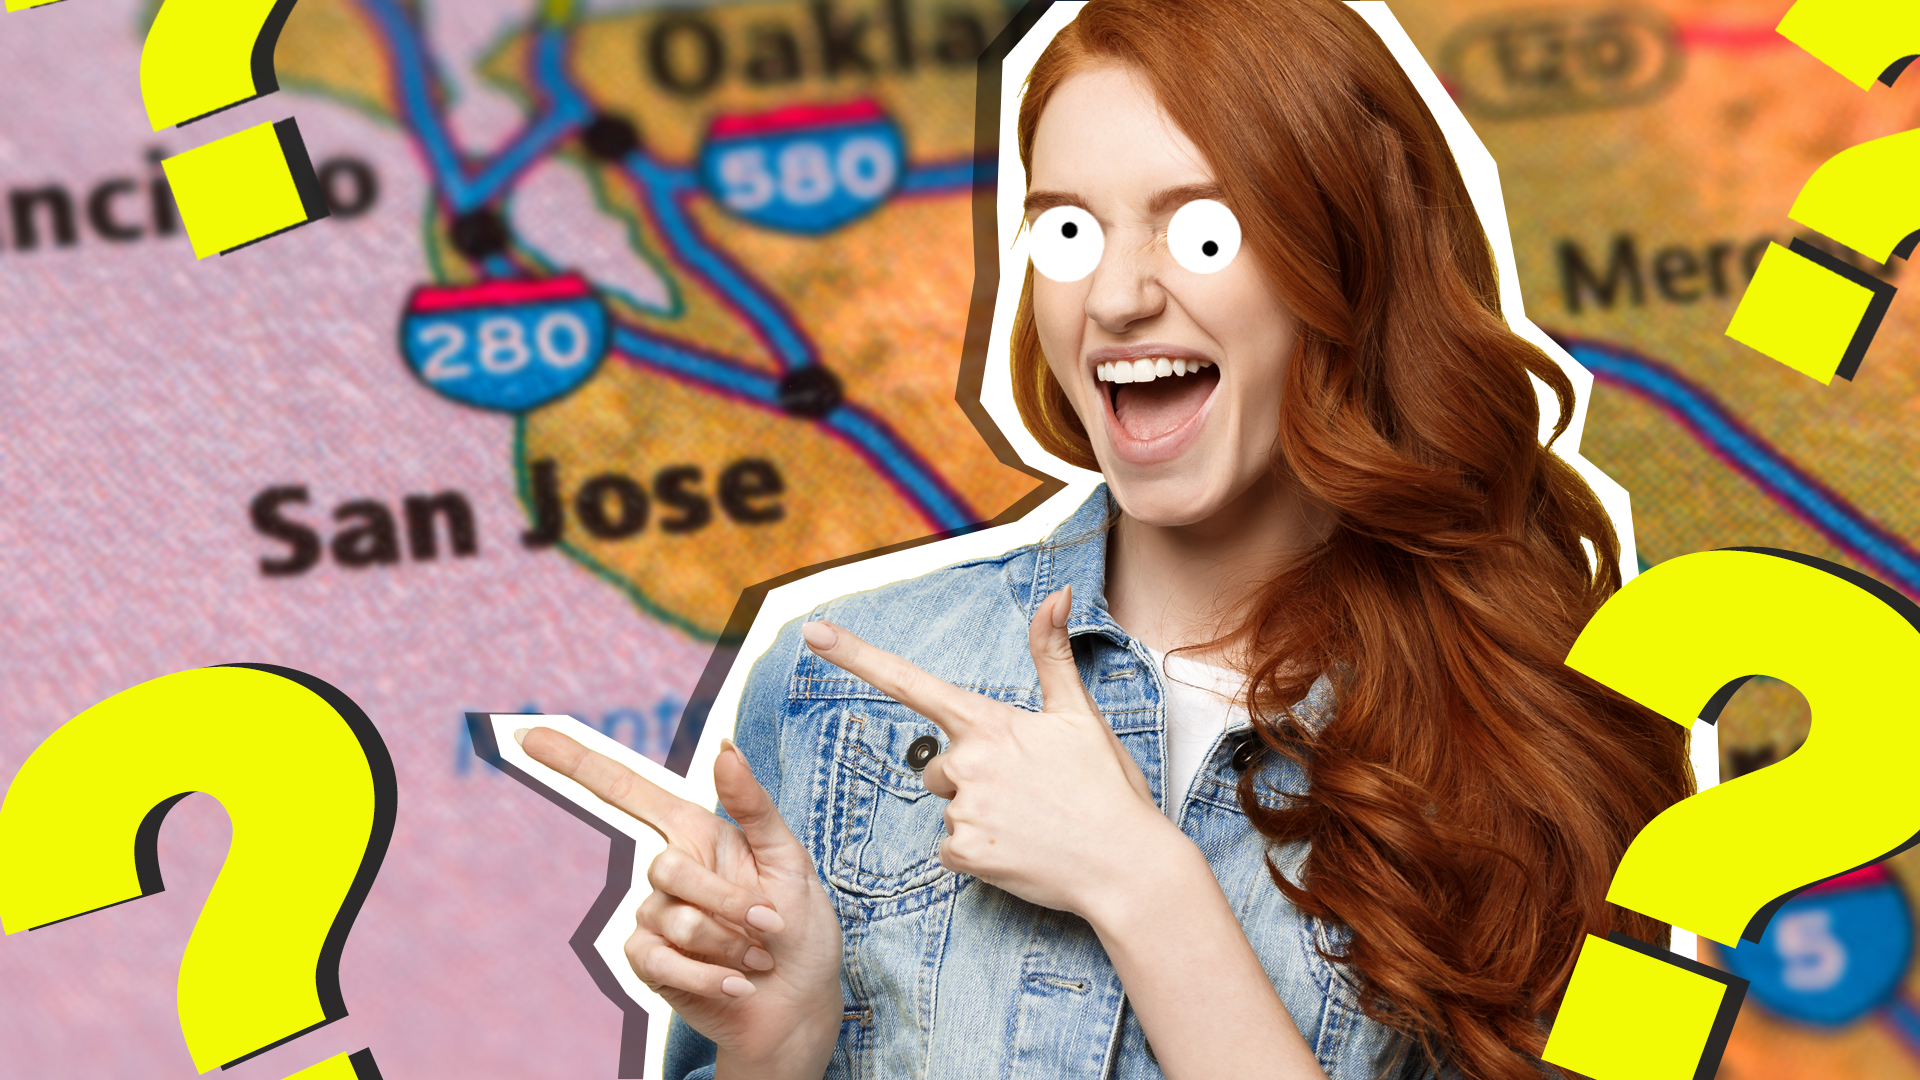 Girl pointing at San Jose on a map